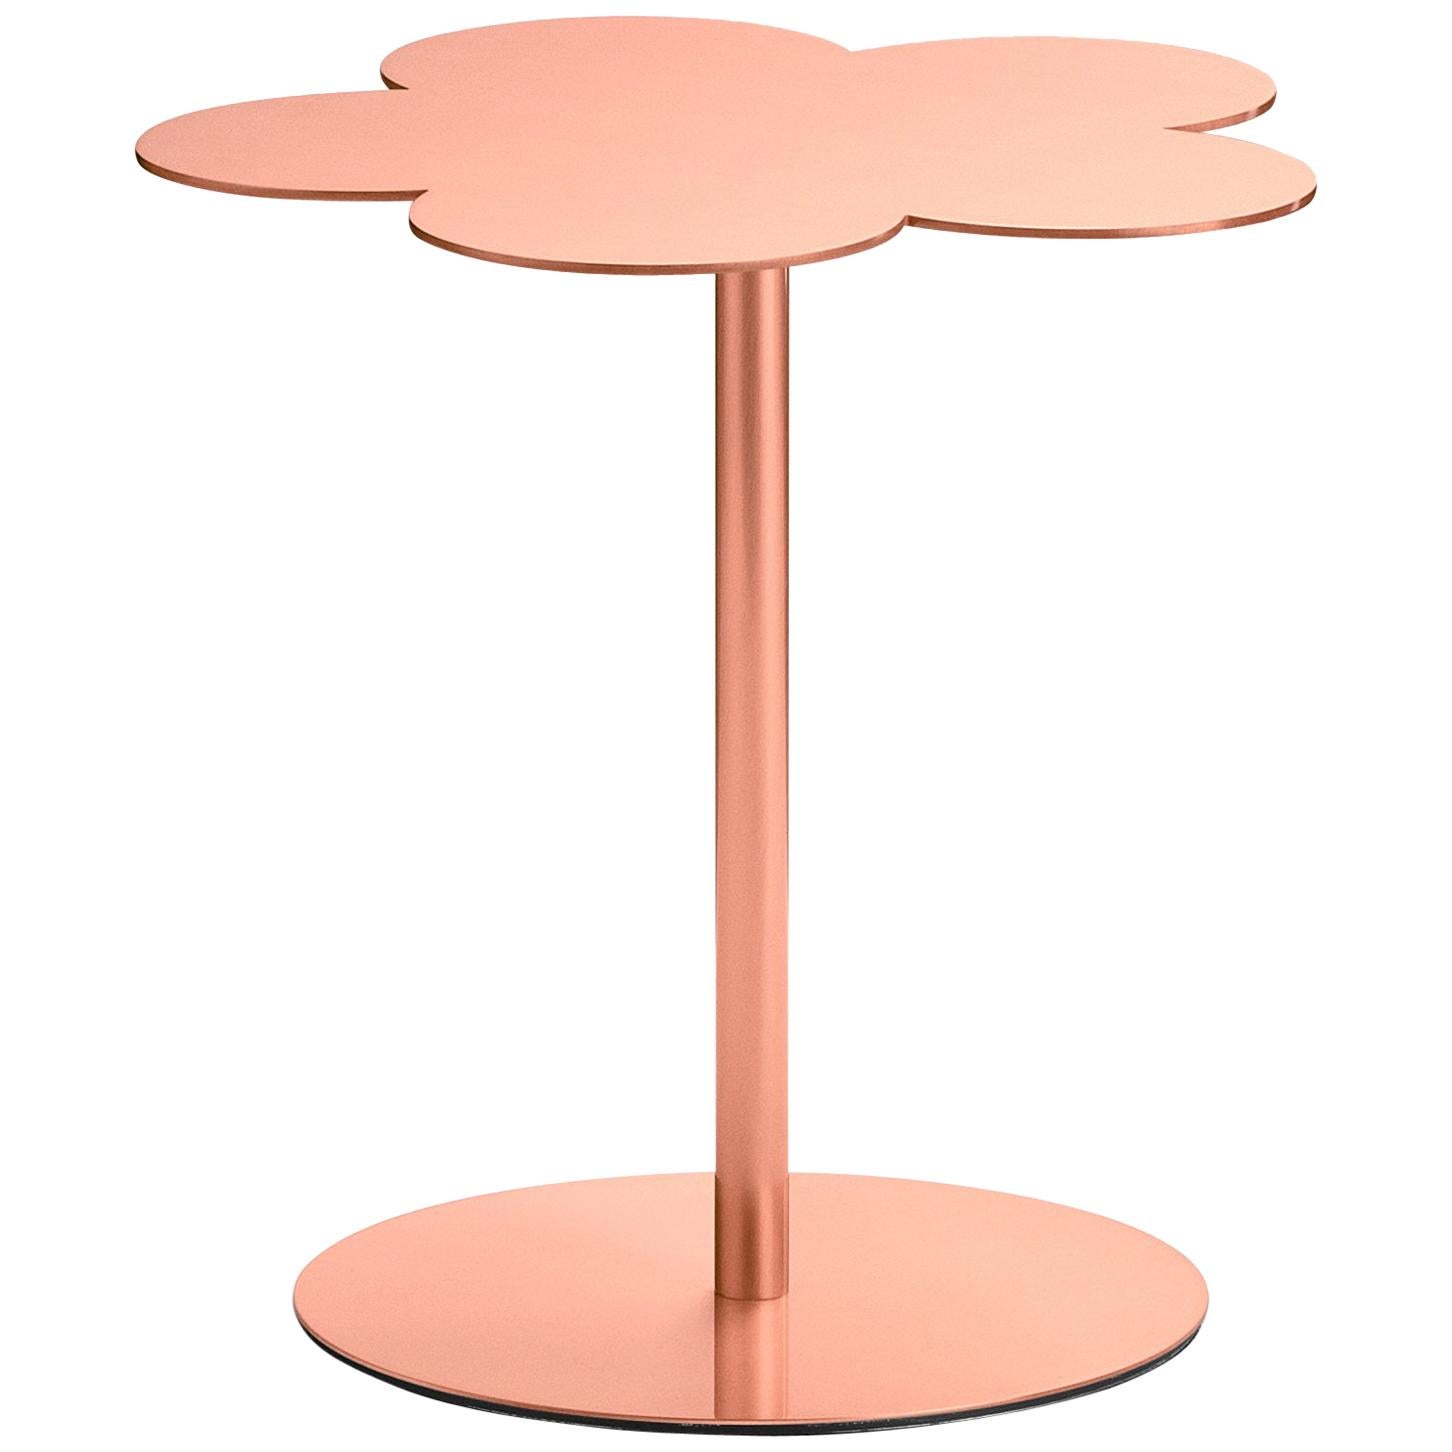 Ghidini 1961 Small Flowers Coffee Side Table in Copper by Stefano Giovannoni